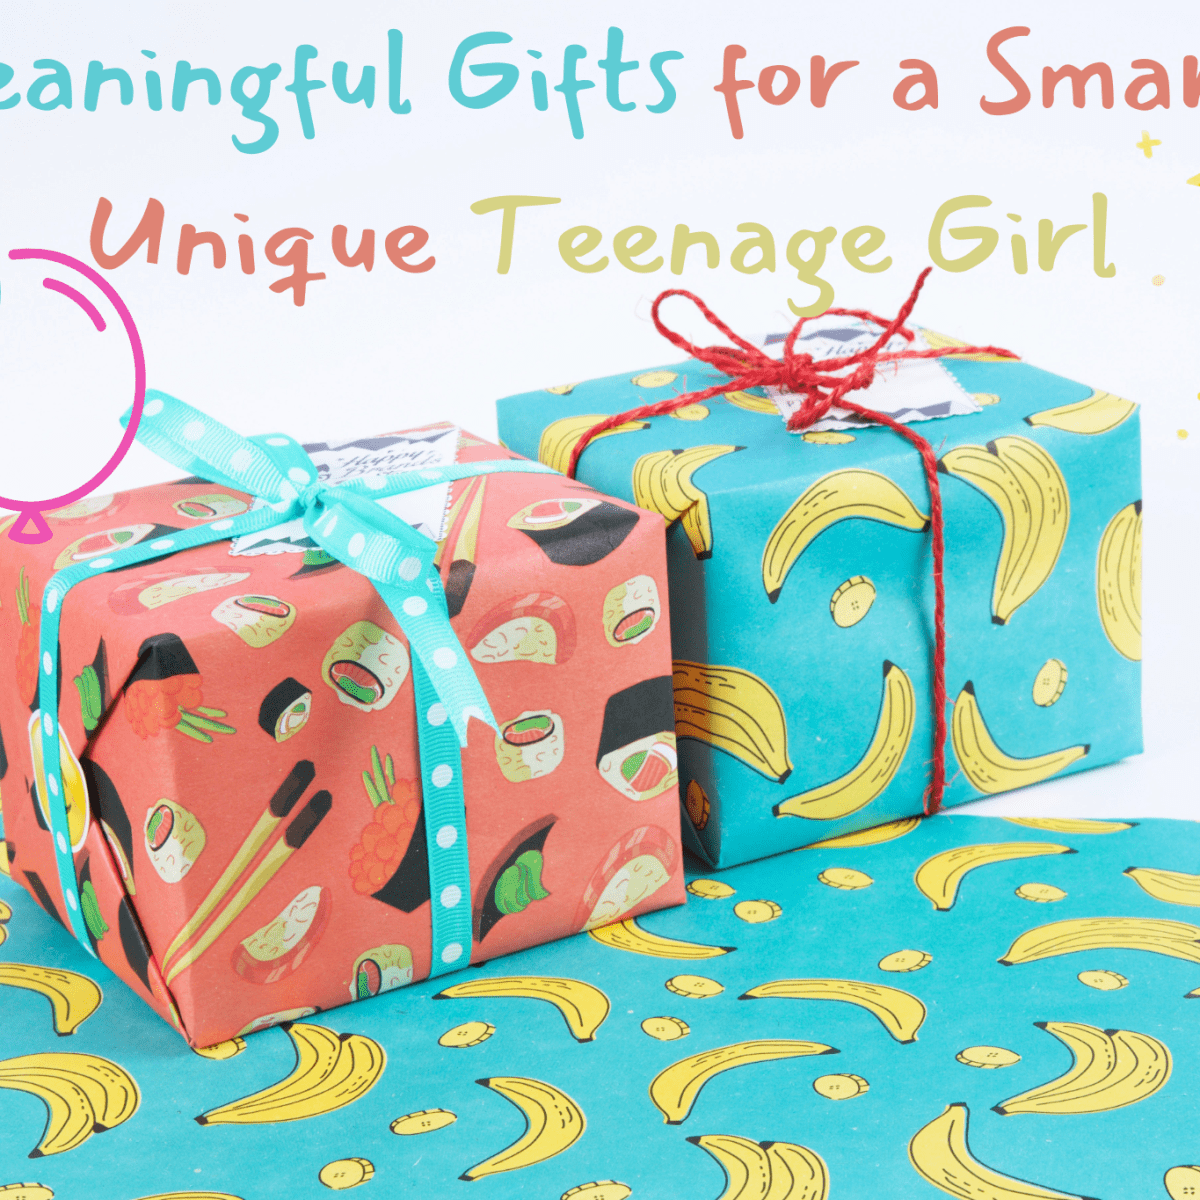 Happy Lolli Unique Birthday Gift for Girls 8 Fabulous Individually Wrapped Gifts in One –Play Fun for Ages 7-13 with 8 Tasks to Encourage Empowerment and Motivate 